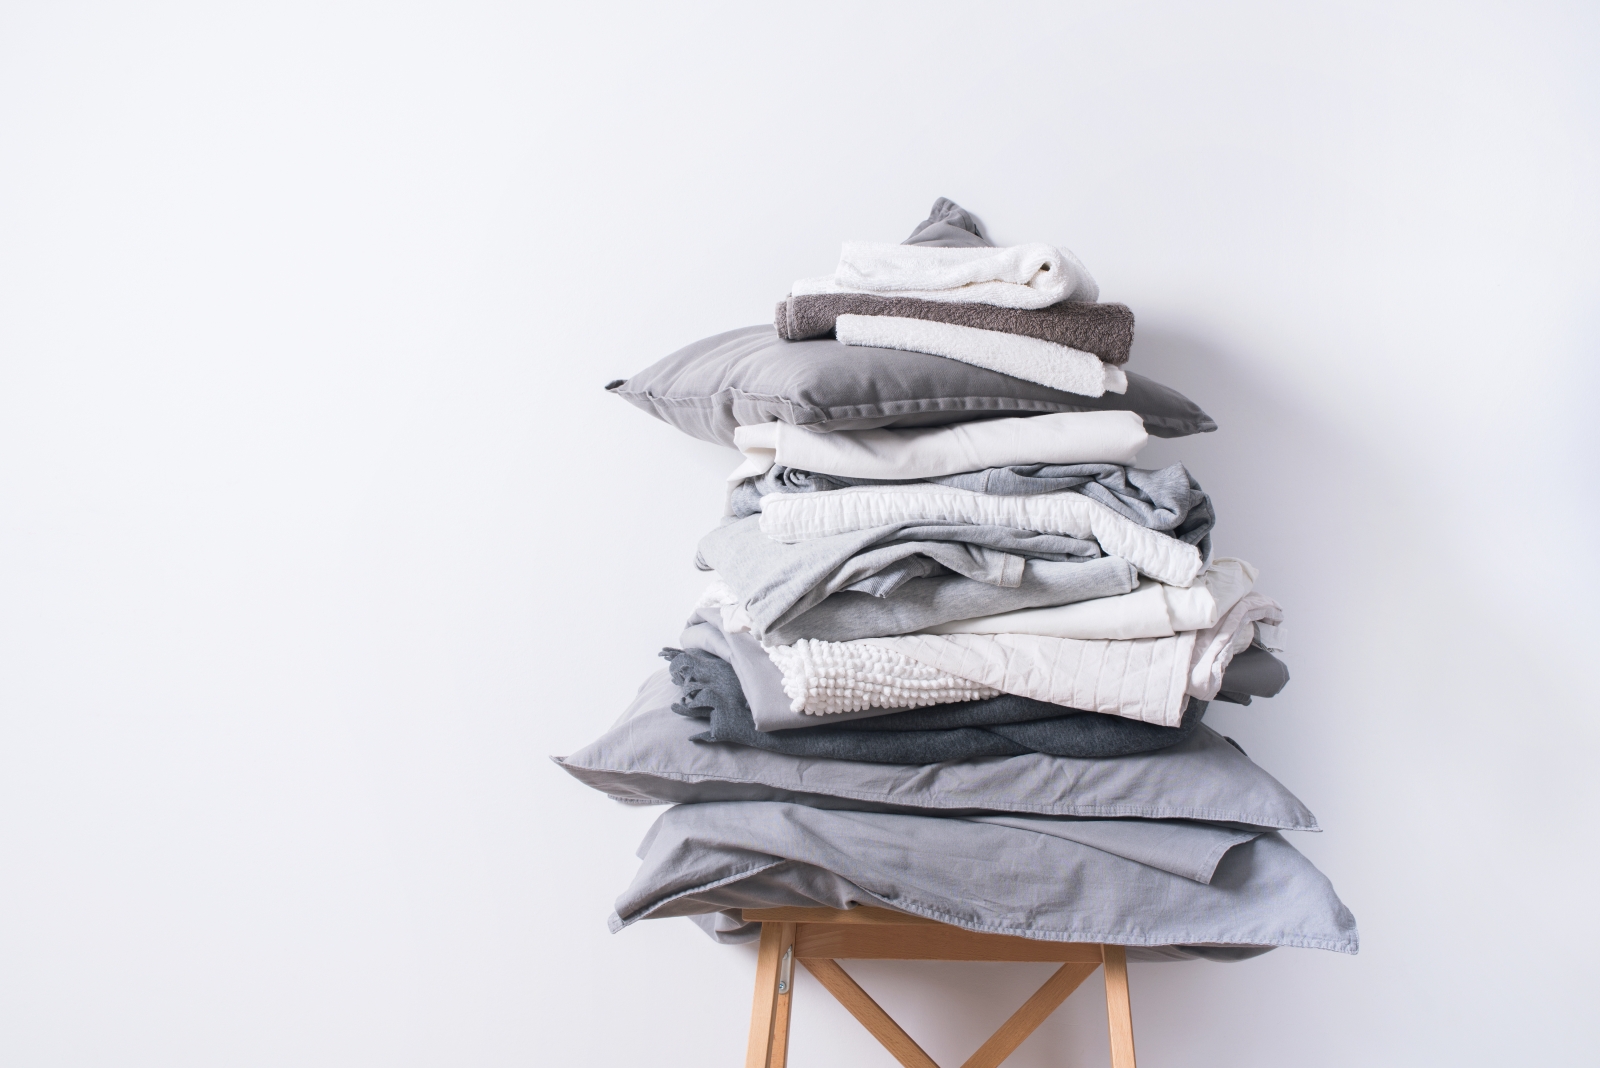 Image of pile of linens